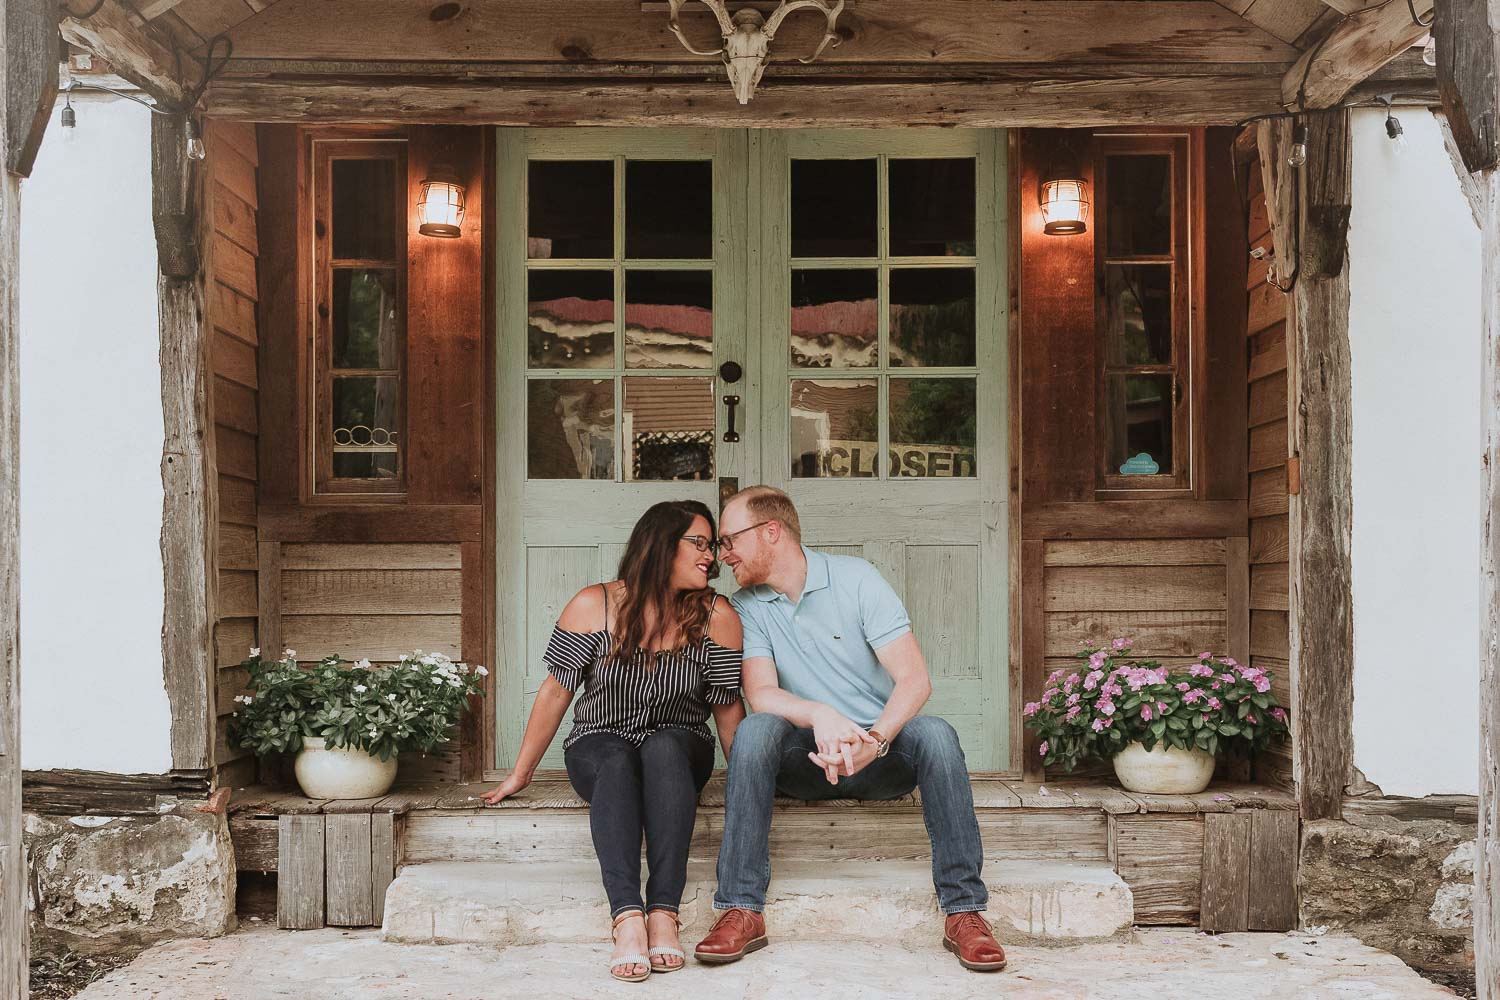 Andrea and Alex engagement session Gruene is a former town in Comal County in the U.S. state of Texas. Once a significant cotton-producing community along the Guadalupe River, the town has now shifted its economy to one supported primarily by tourism.